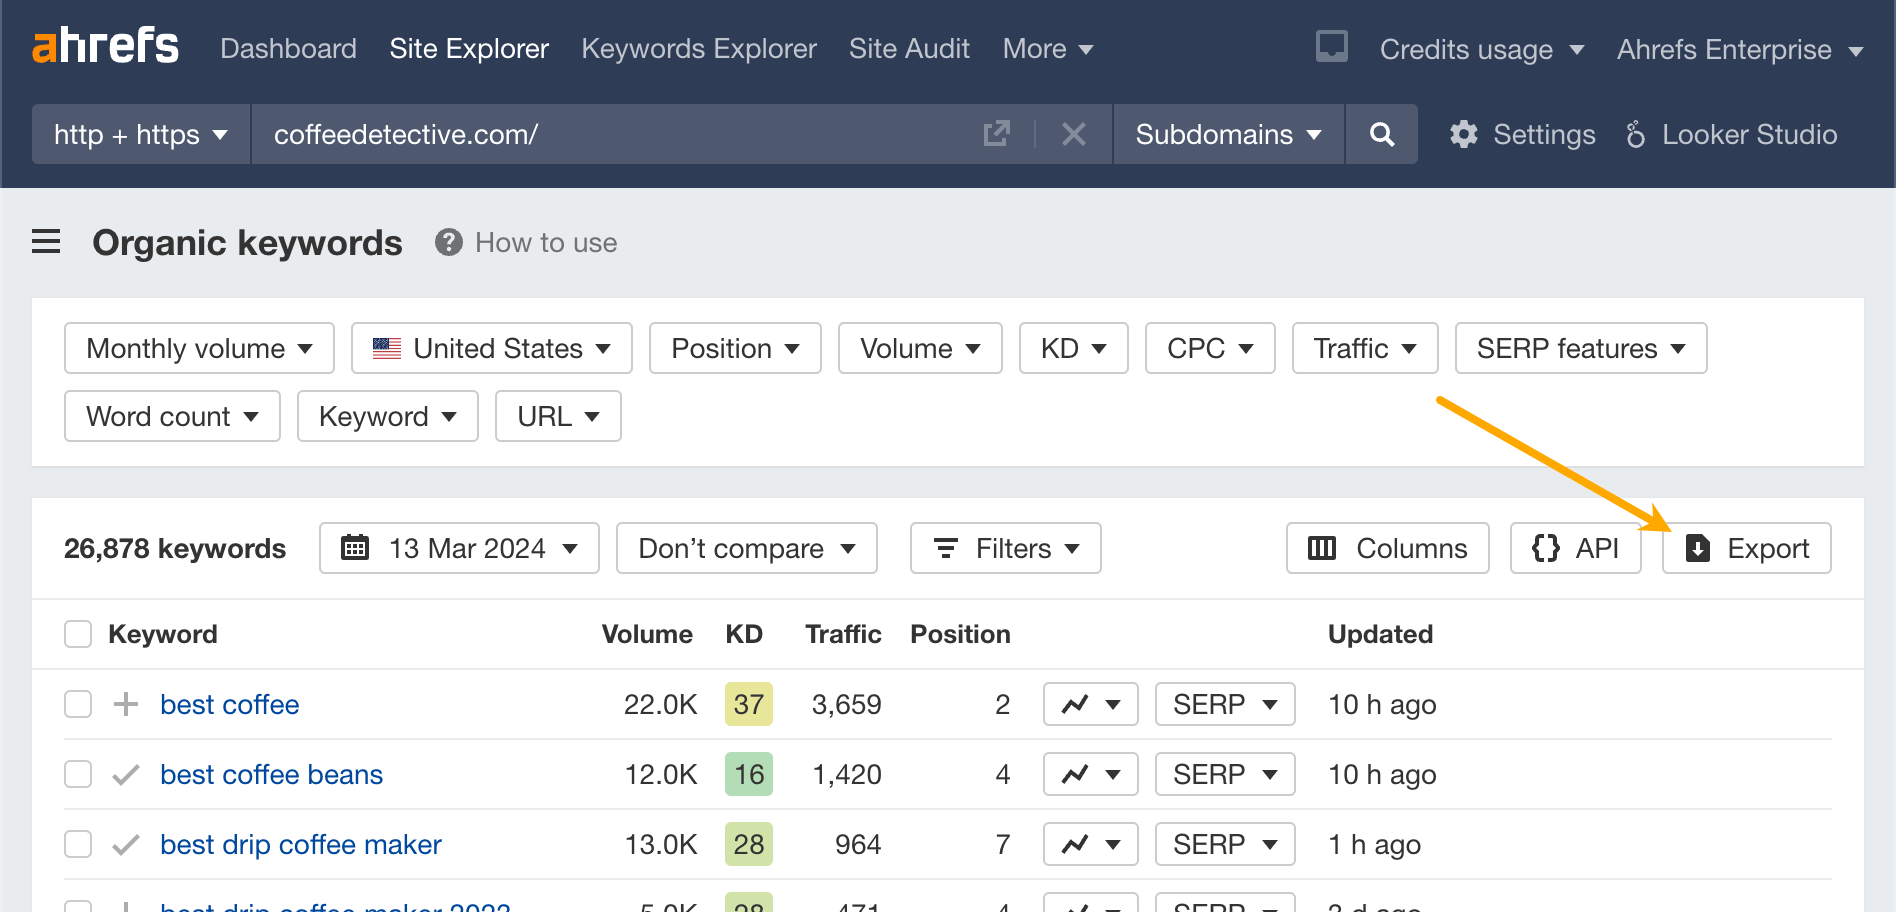 Use the Organic Keywords report in Ahrefs' Site Explorer to find your competitor's keywords, then export the data